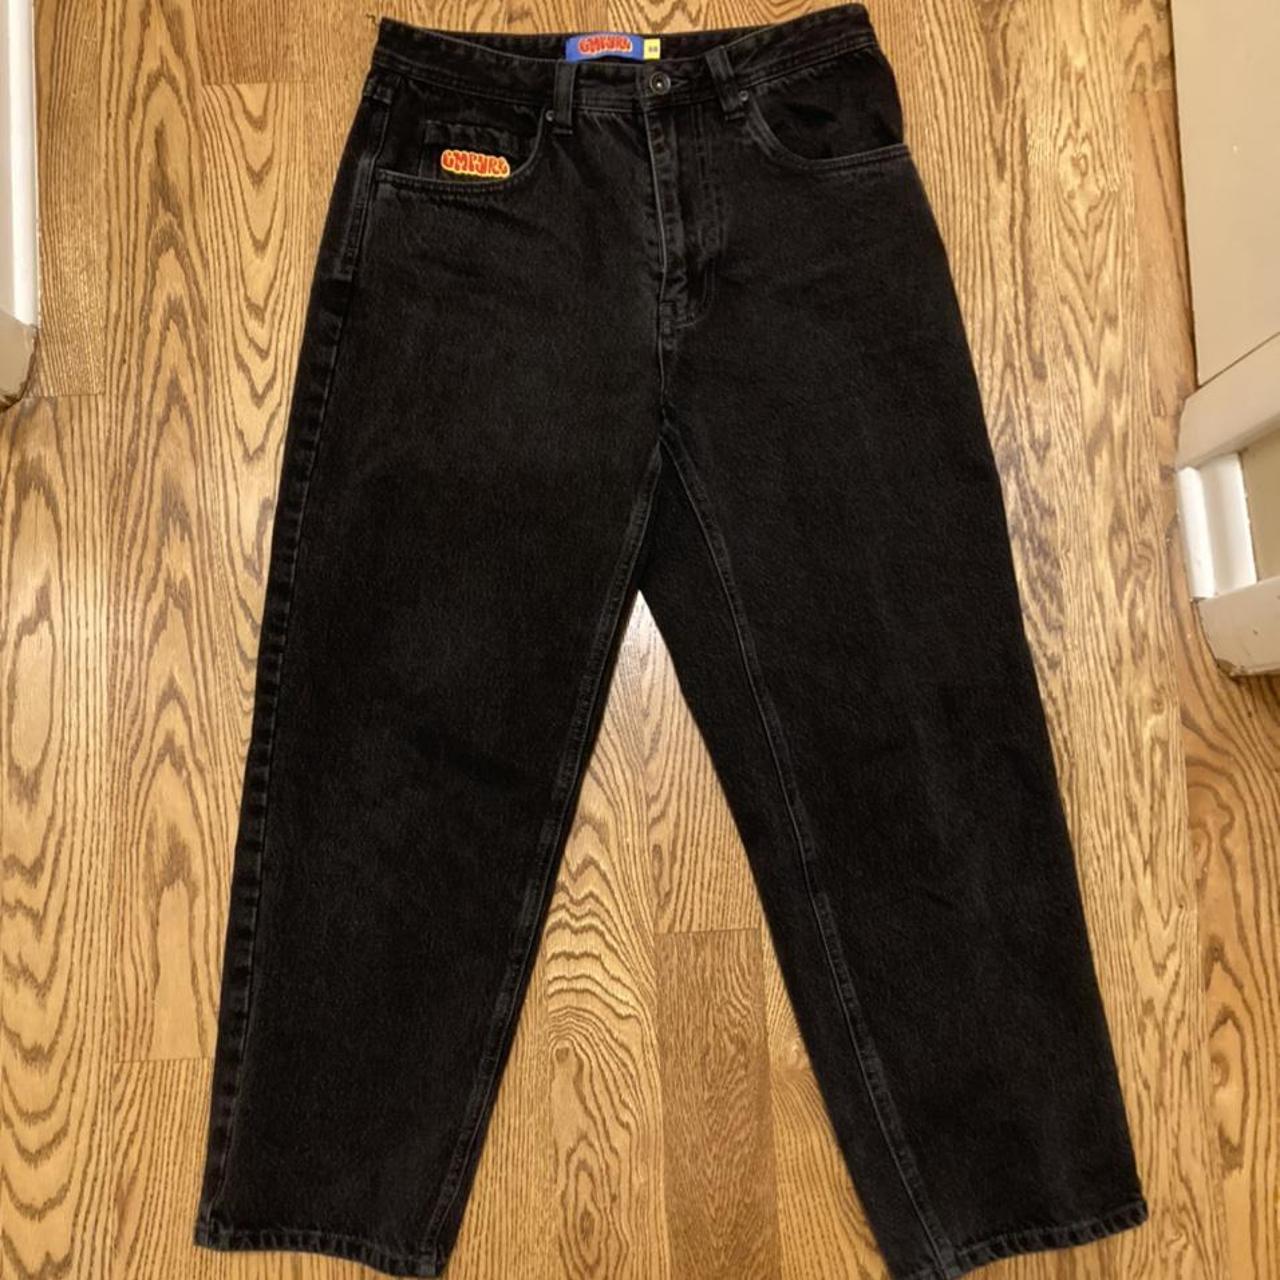 Men's Black and Grey Jeans